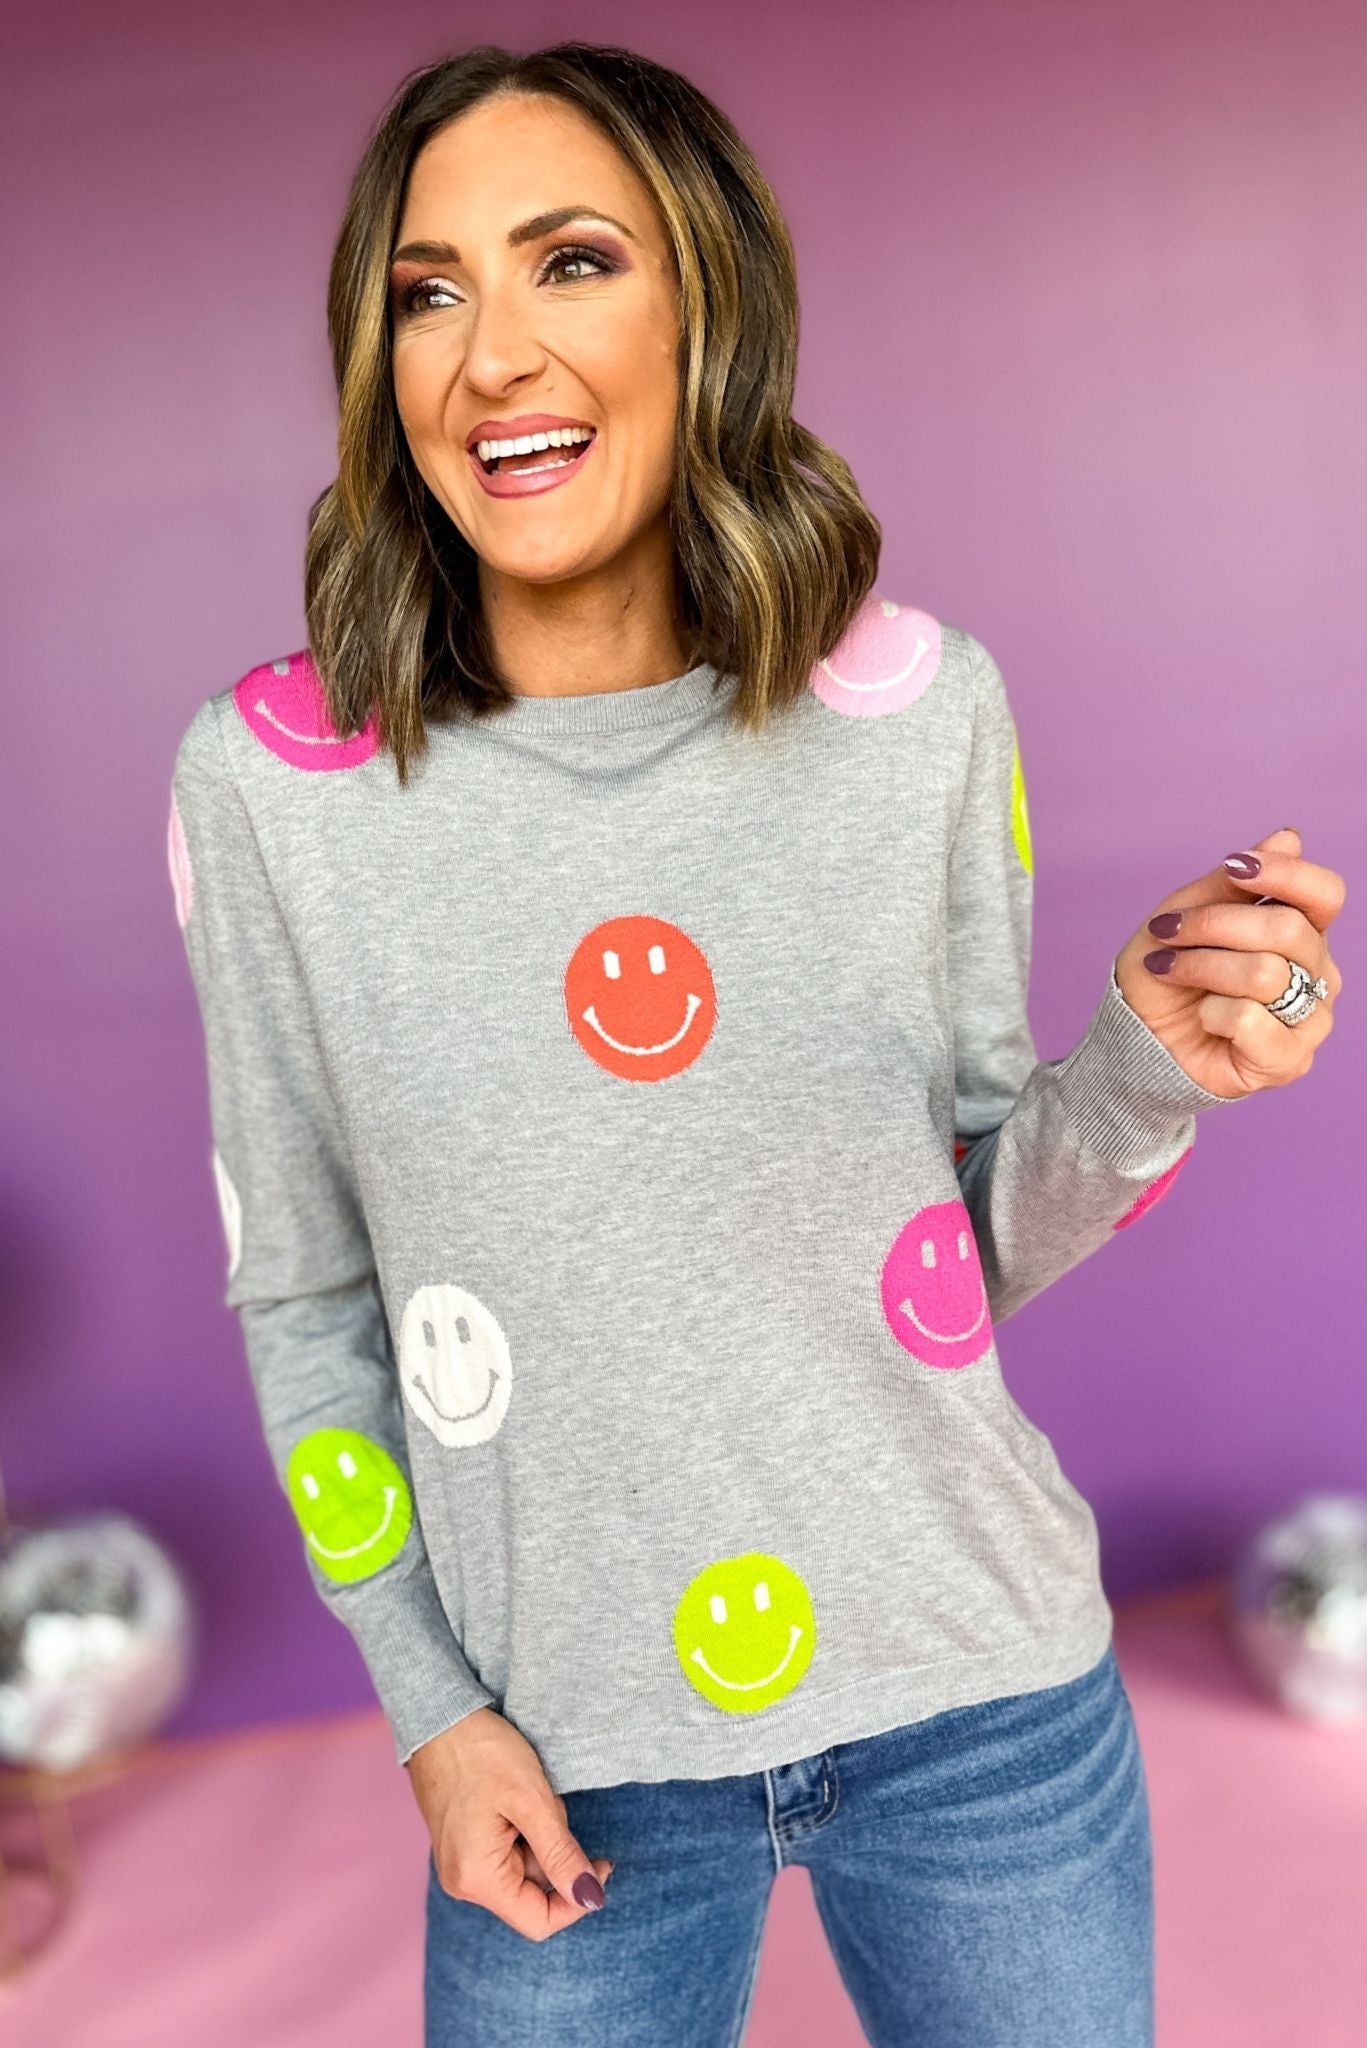 THML Grey Colorful Smiley Polka Dot Sweater, elevated style, elevated sweater, must have style, must have sweater, smiley sweater, smiley face, printed sweater, must have sweater, fall style, fall sweater, fun mom style, fun mom sweater, shop style your senses by mallory fitzsimmons